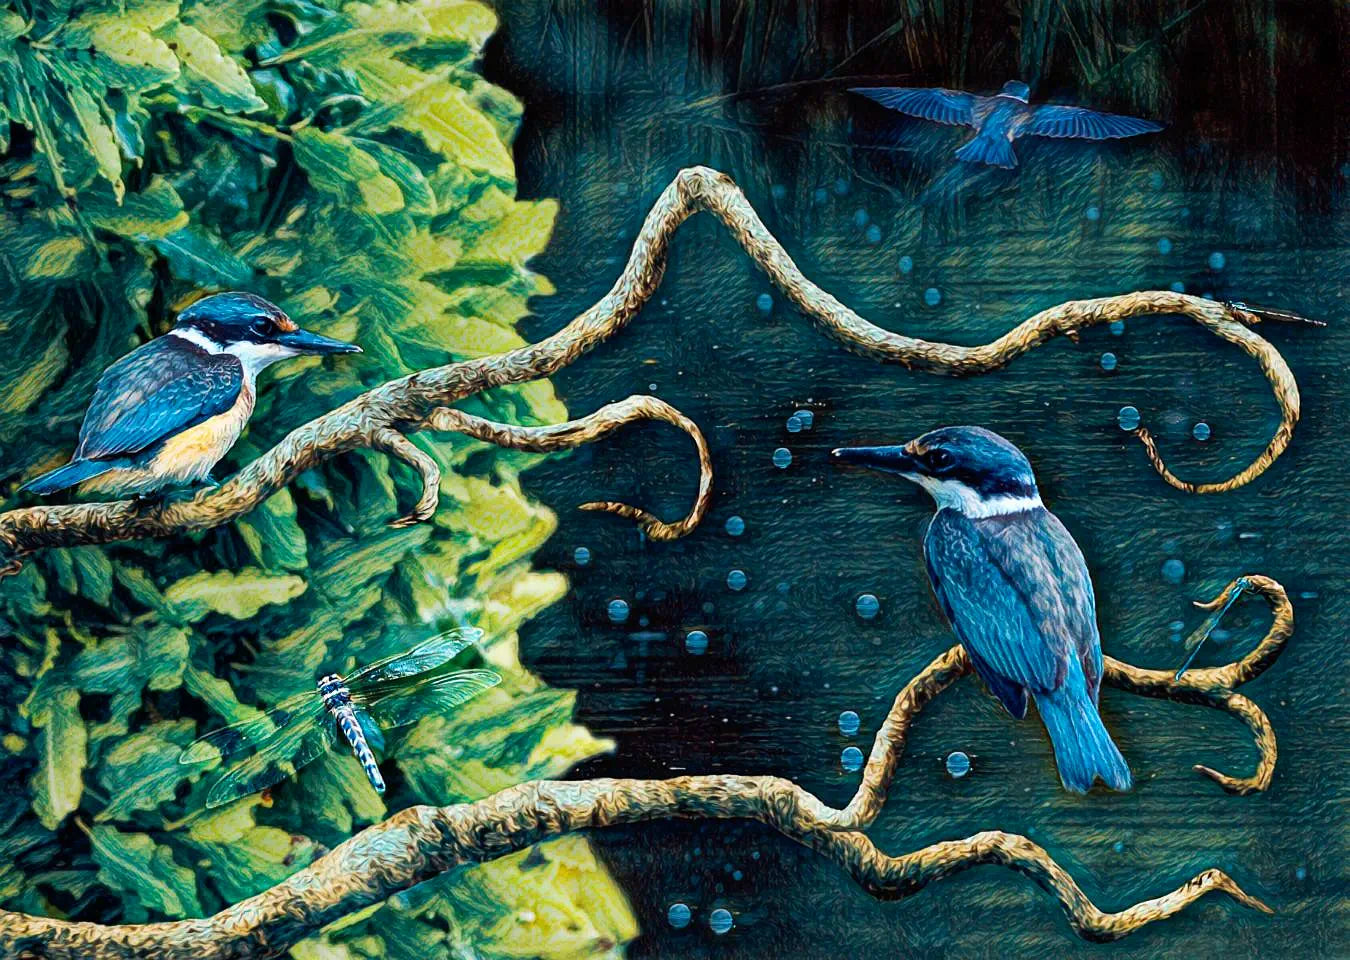 Artwork of two kingfishers on a branch overlooking a pond